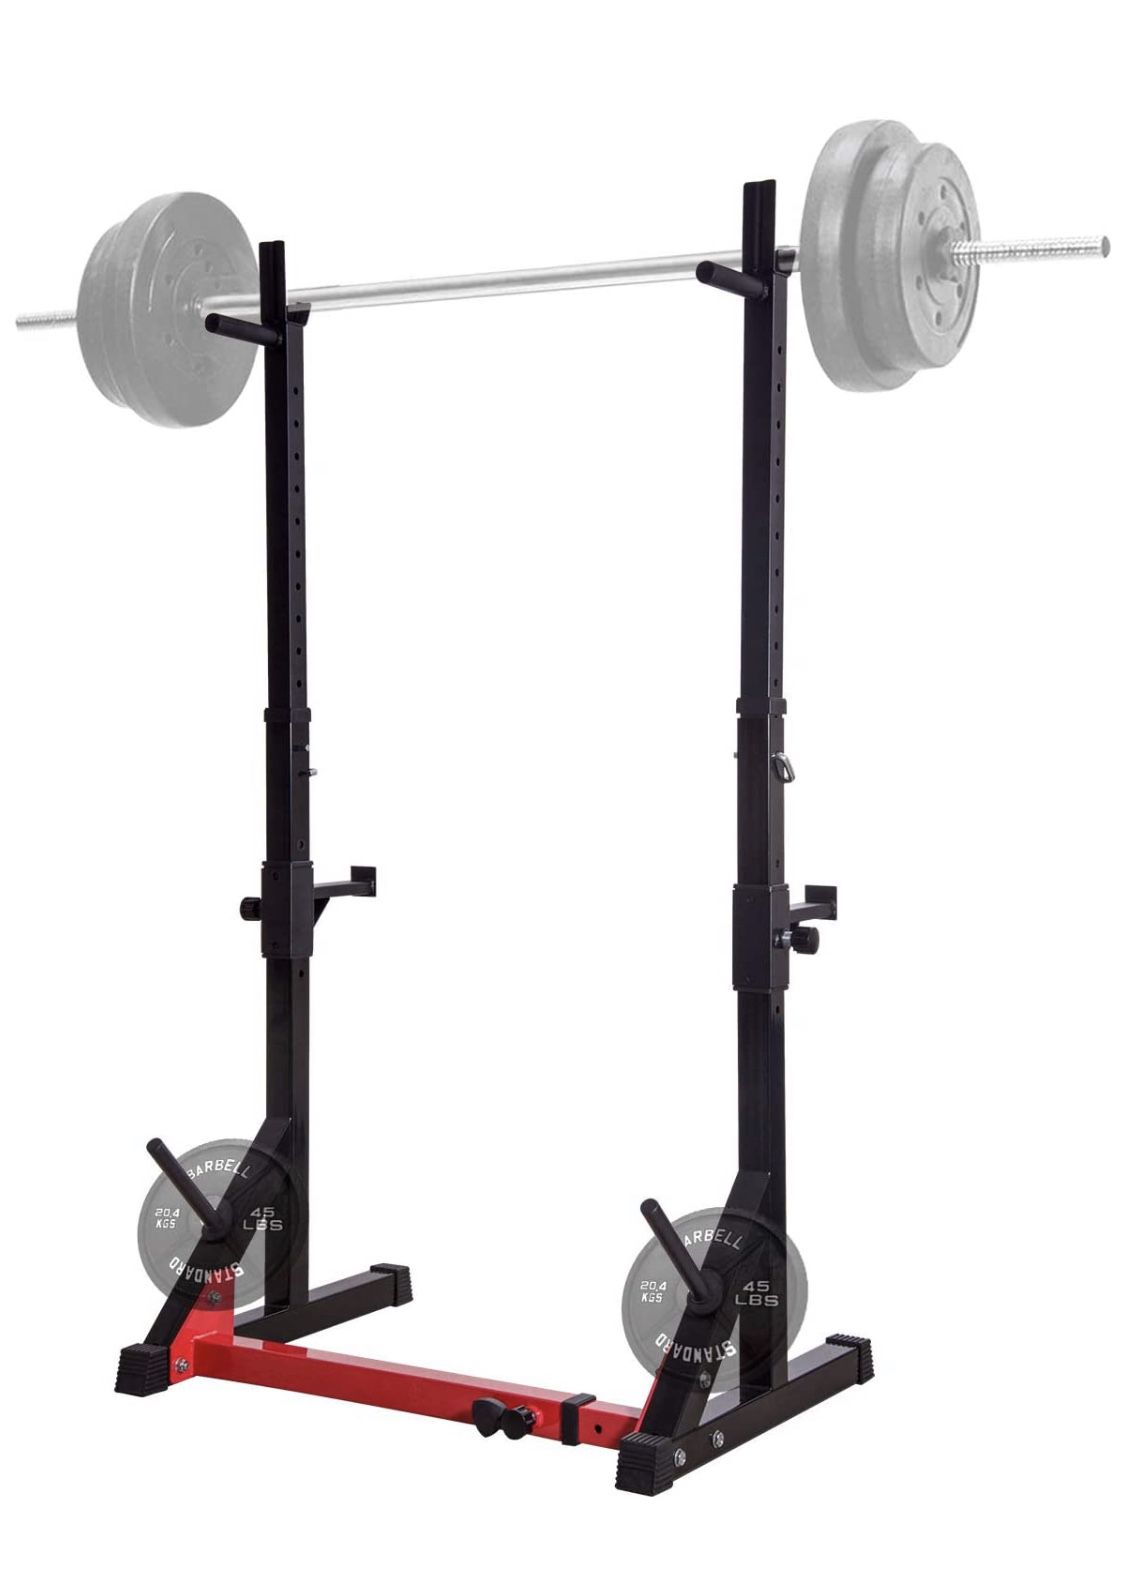 Multi-Function Barbell Rack Height Adjustable Dip Stand Gym Family Fitness Squat Rack Weight Lifting Bench Press Dipping Station with Barbell Plate R